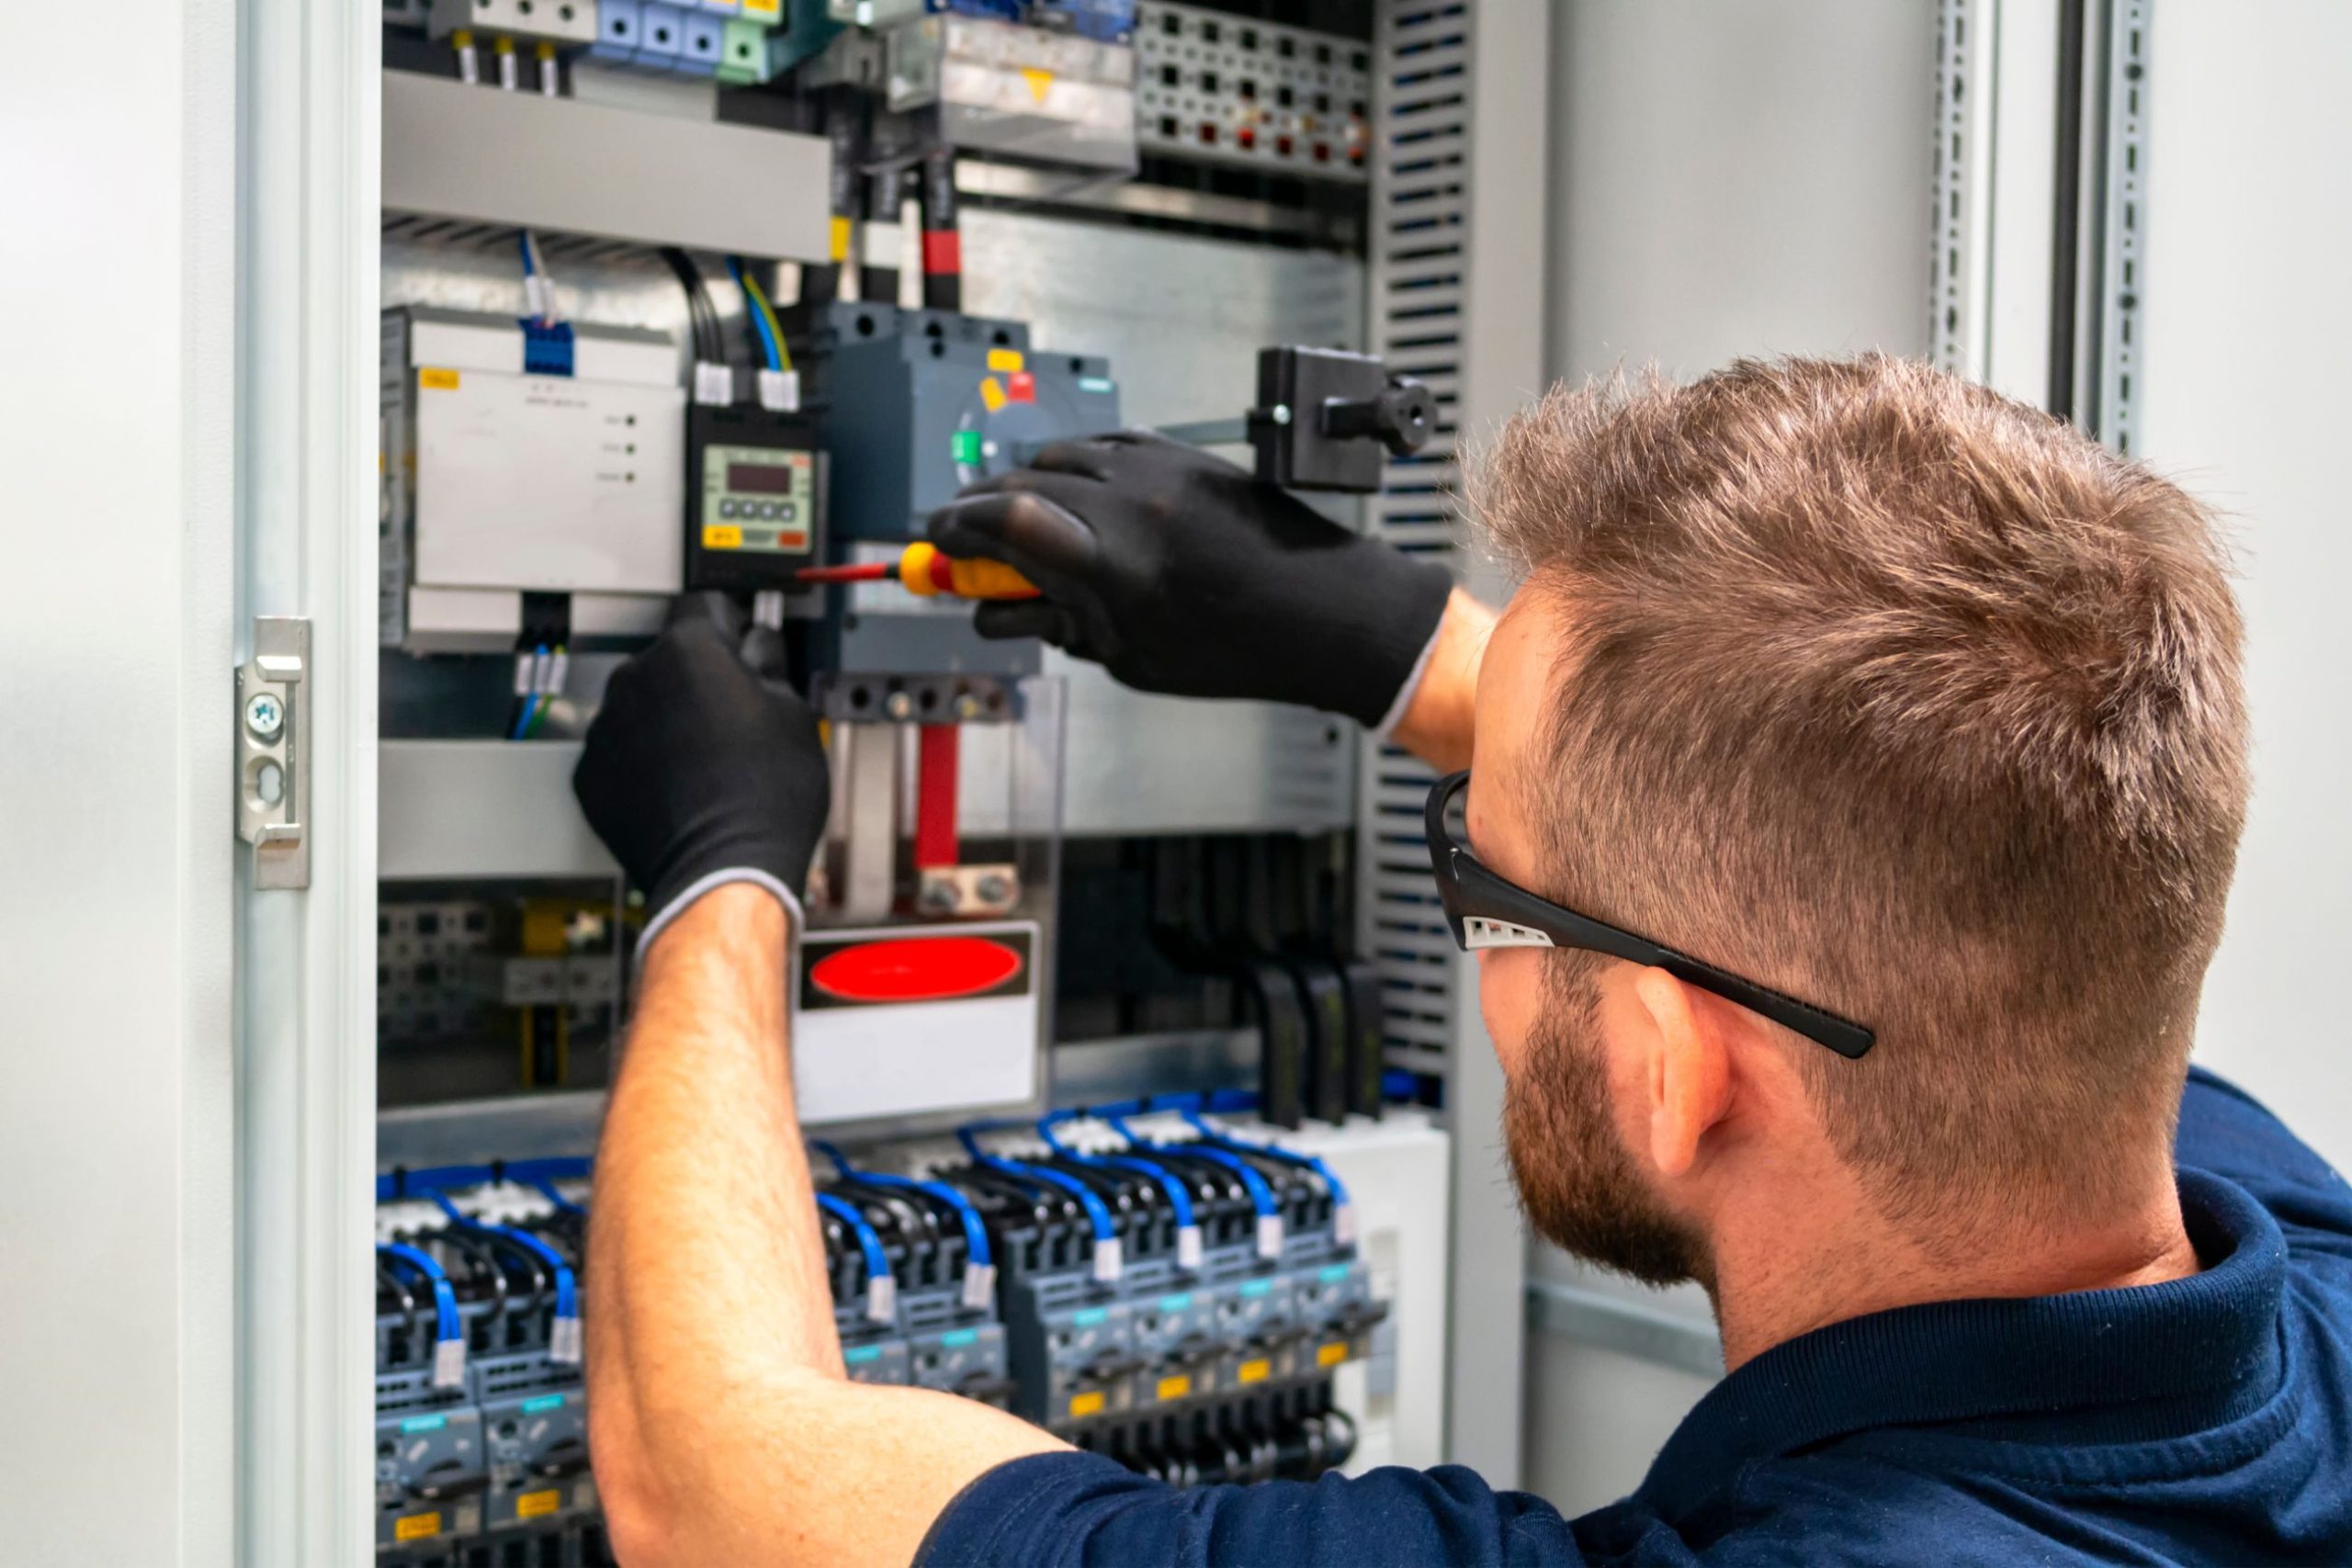 Electrician working on control panel